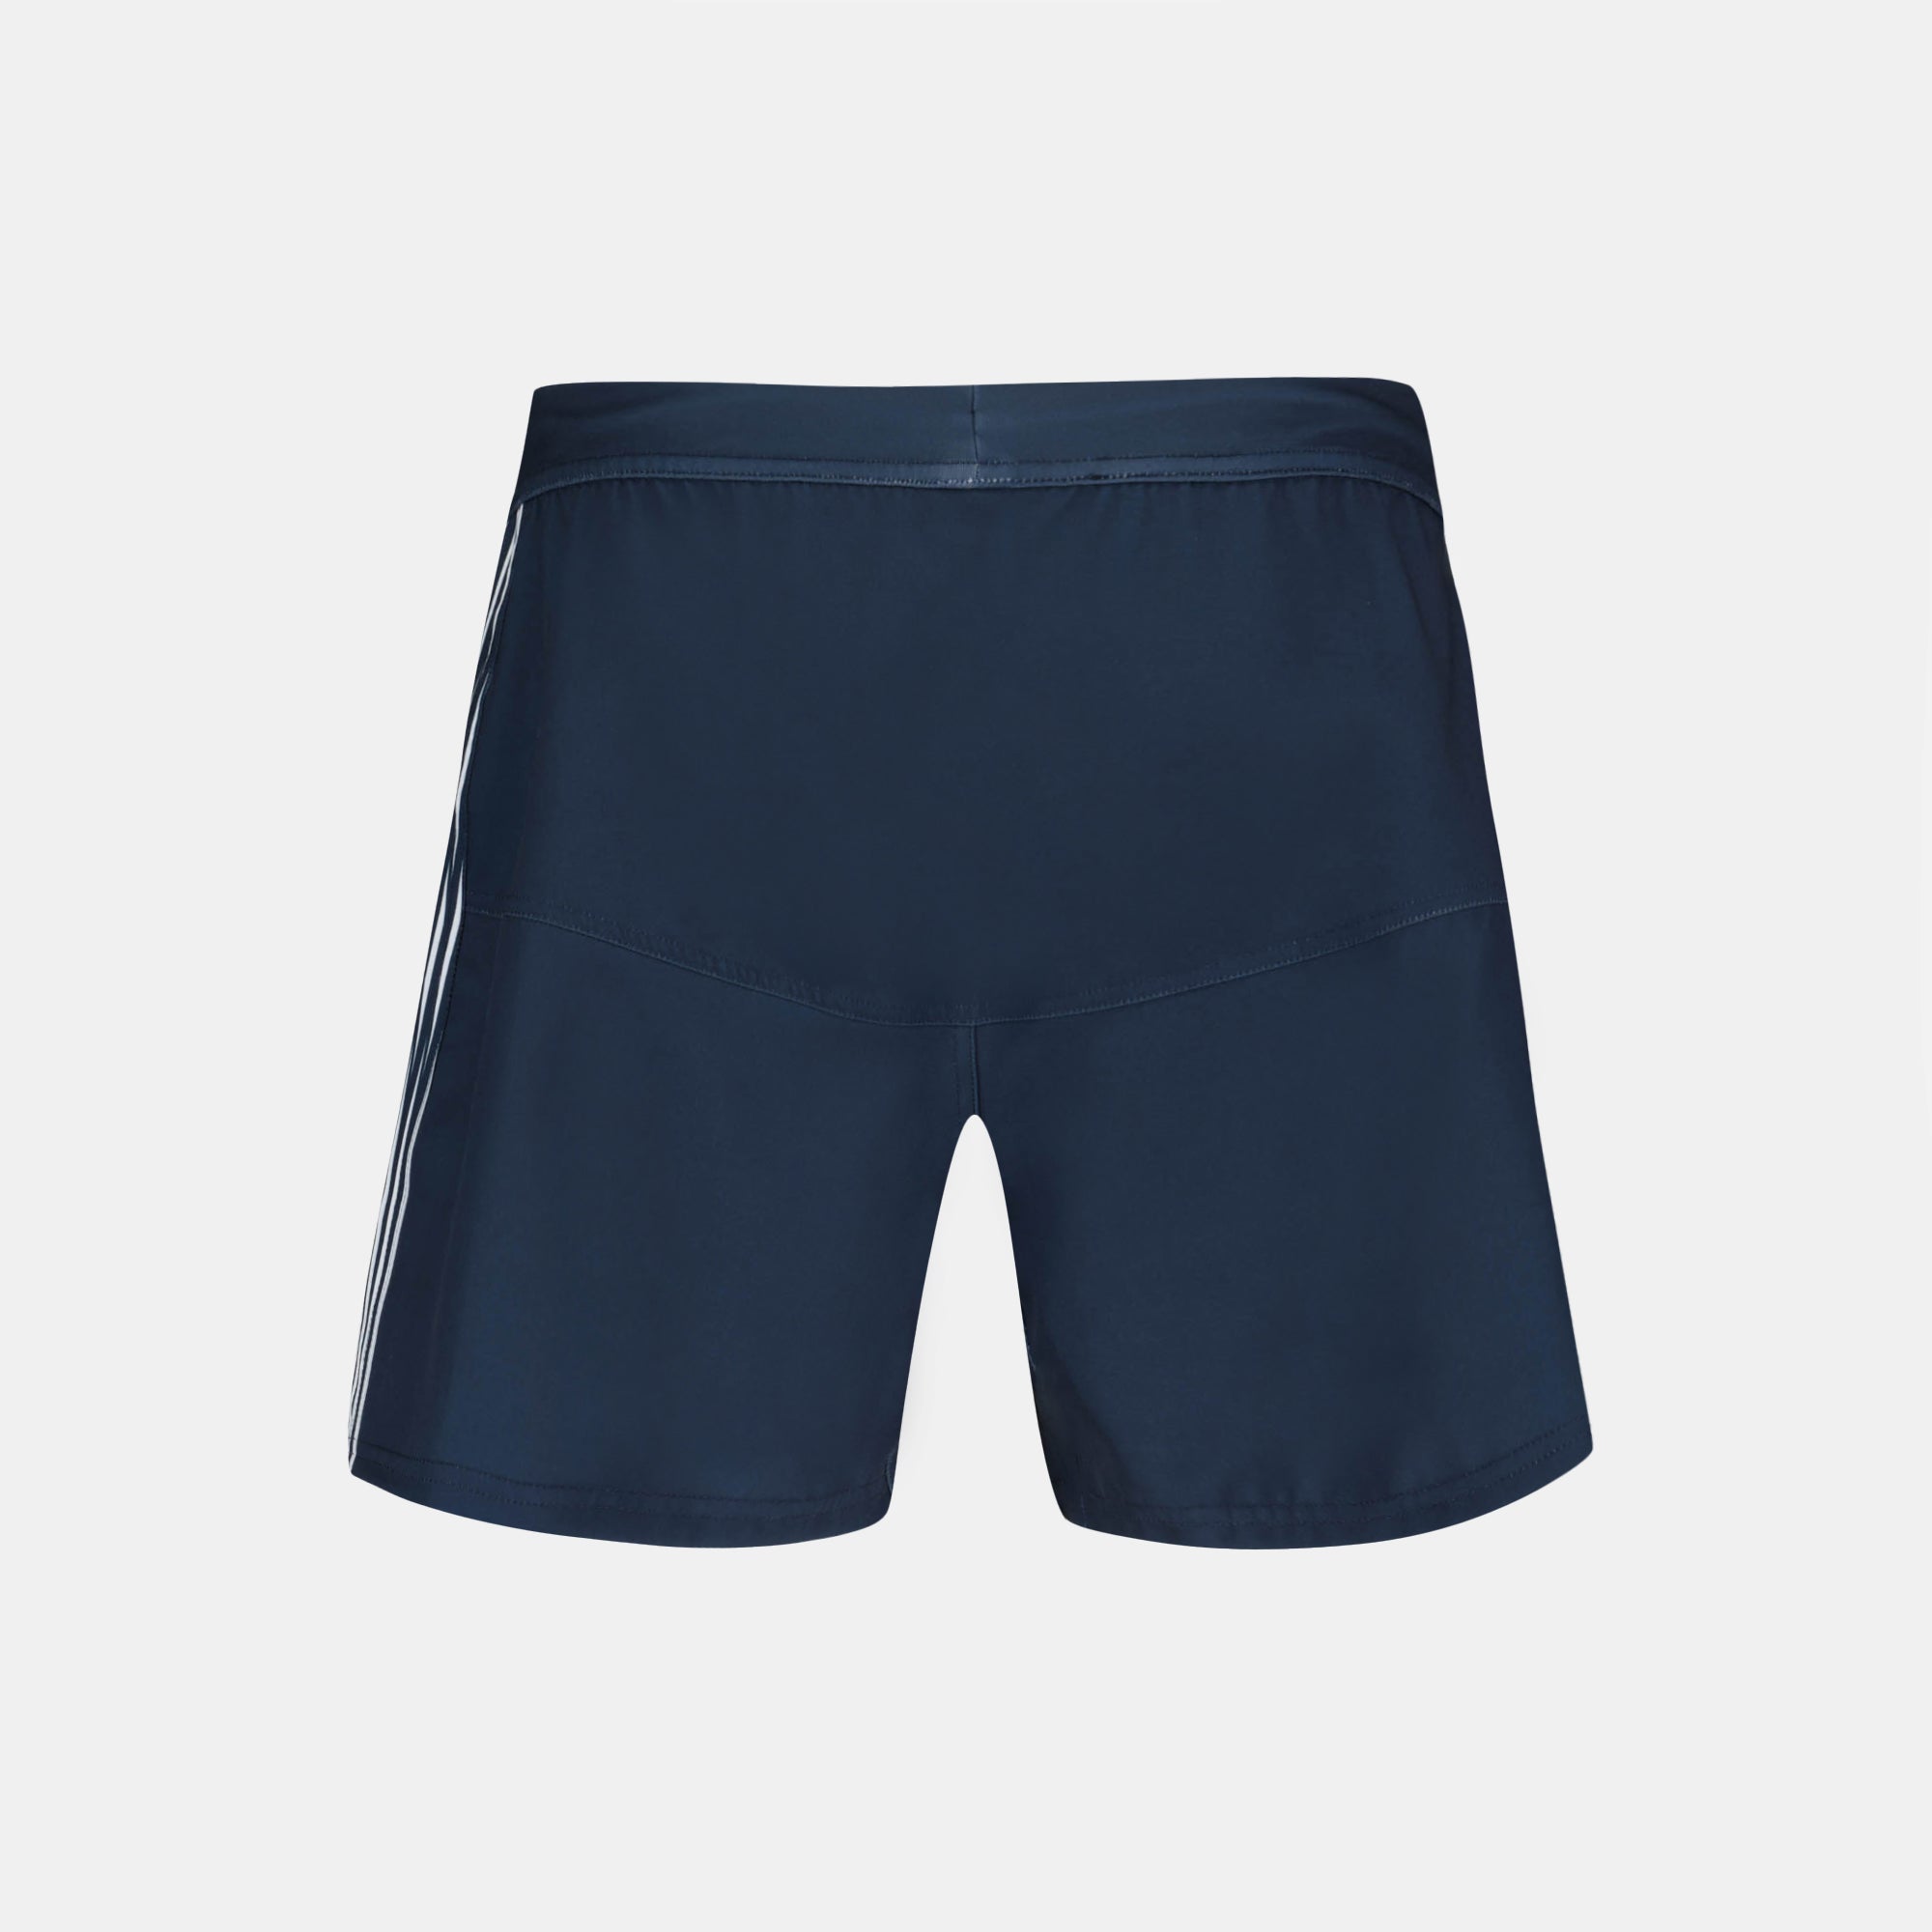 2421954-AB TRAINING Short Rugby M dress blues  | Shorts for men